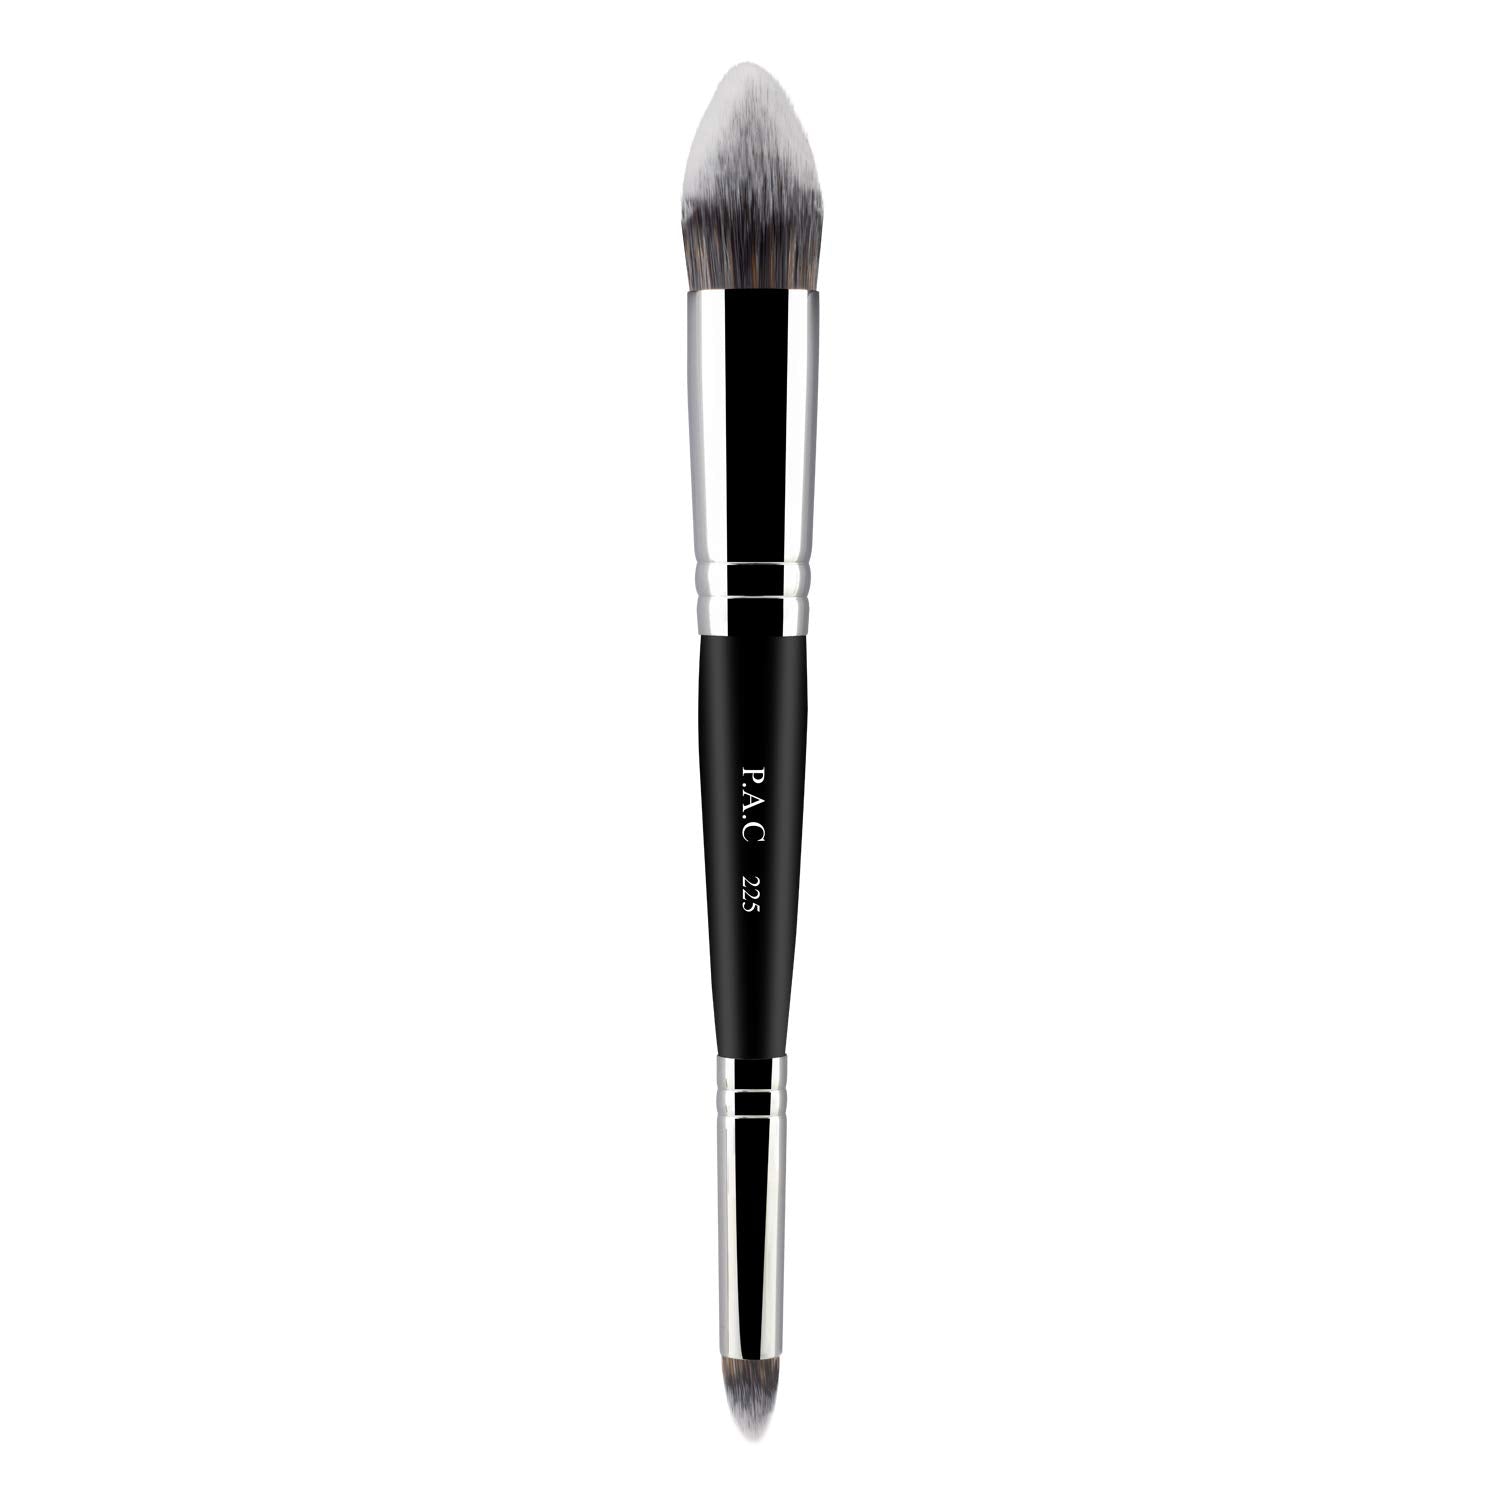 PAC Concealer Brush 225 PAC